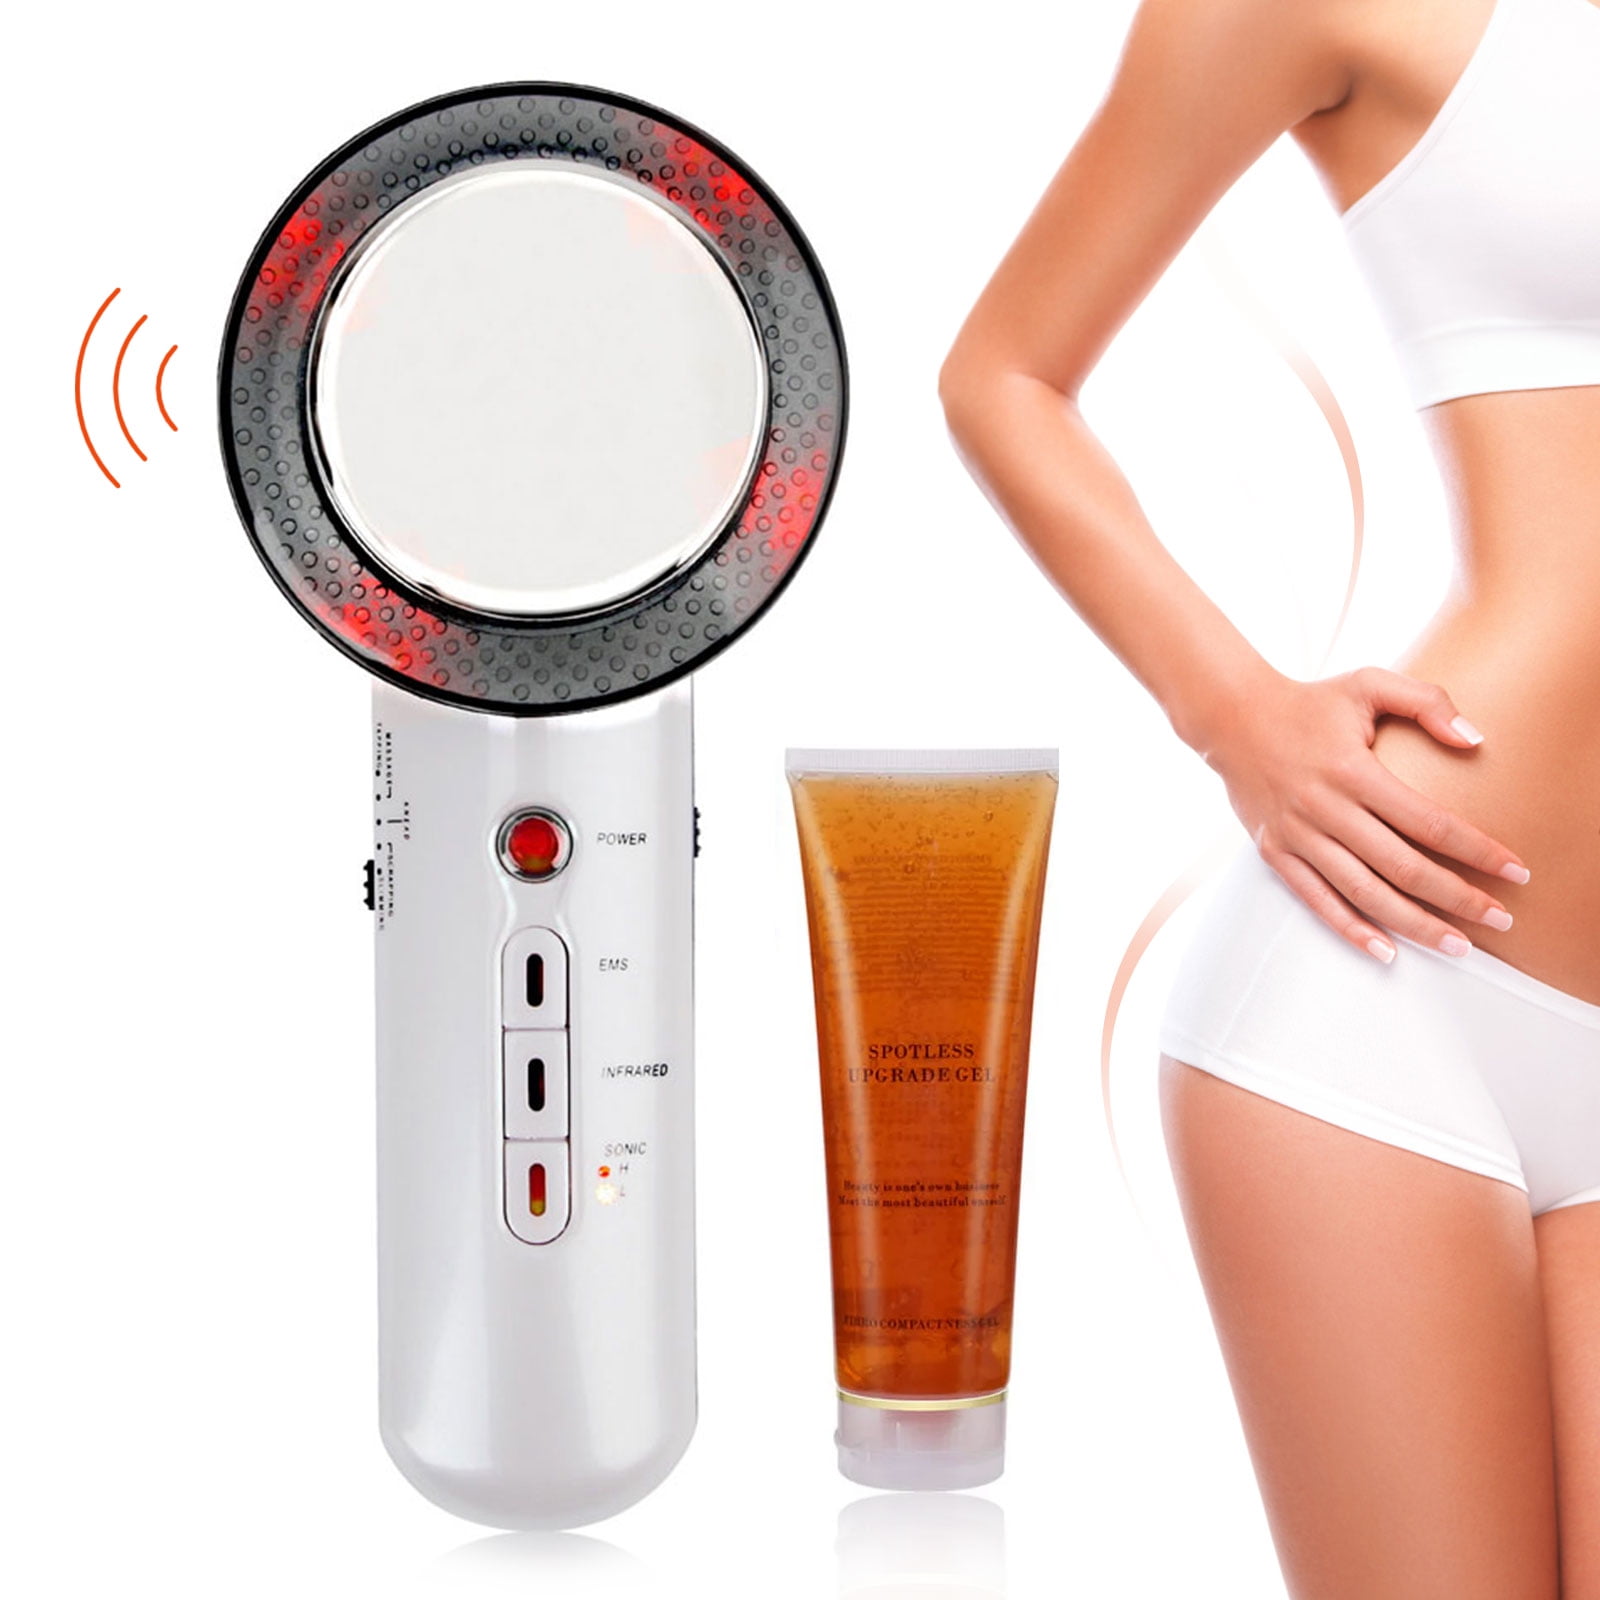 Weight Burning Massager,Body Slimming Massager,3 in 1 Ultrasonic RF  Cellulite Remover Machine with 300ml Gel for Belly Arm and Leg 